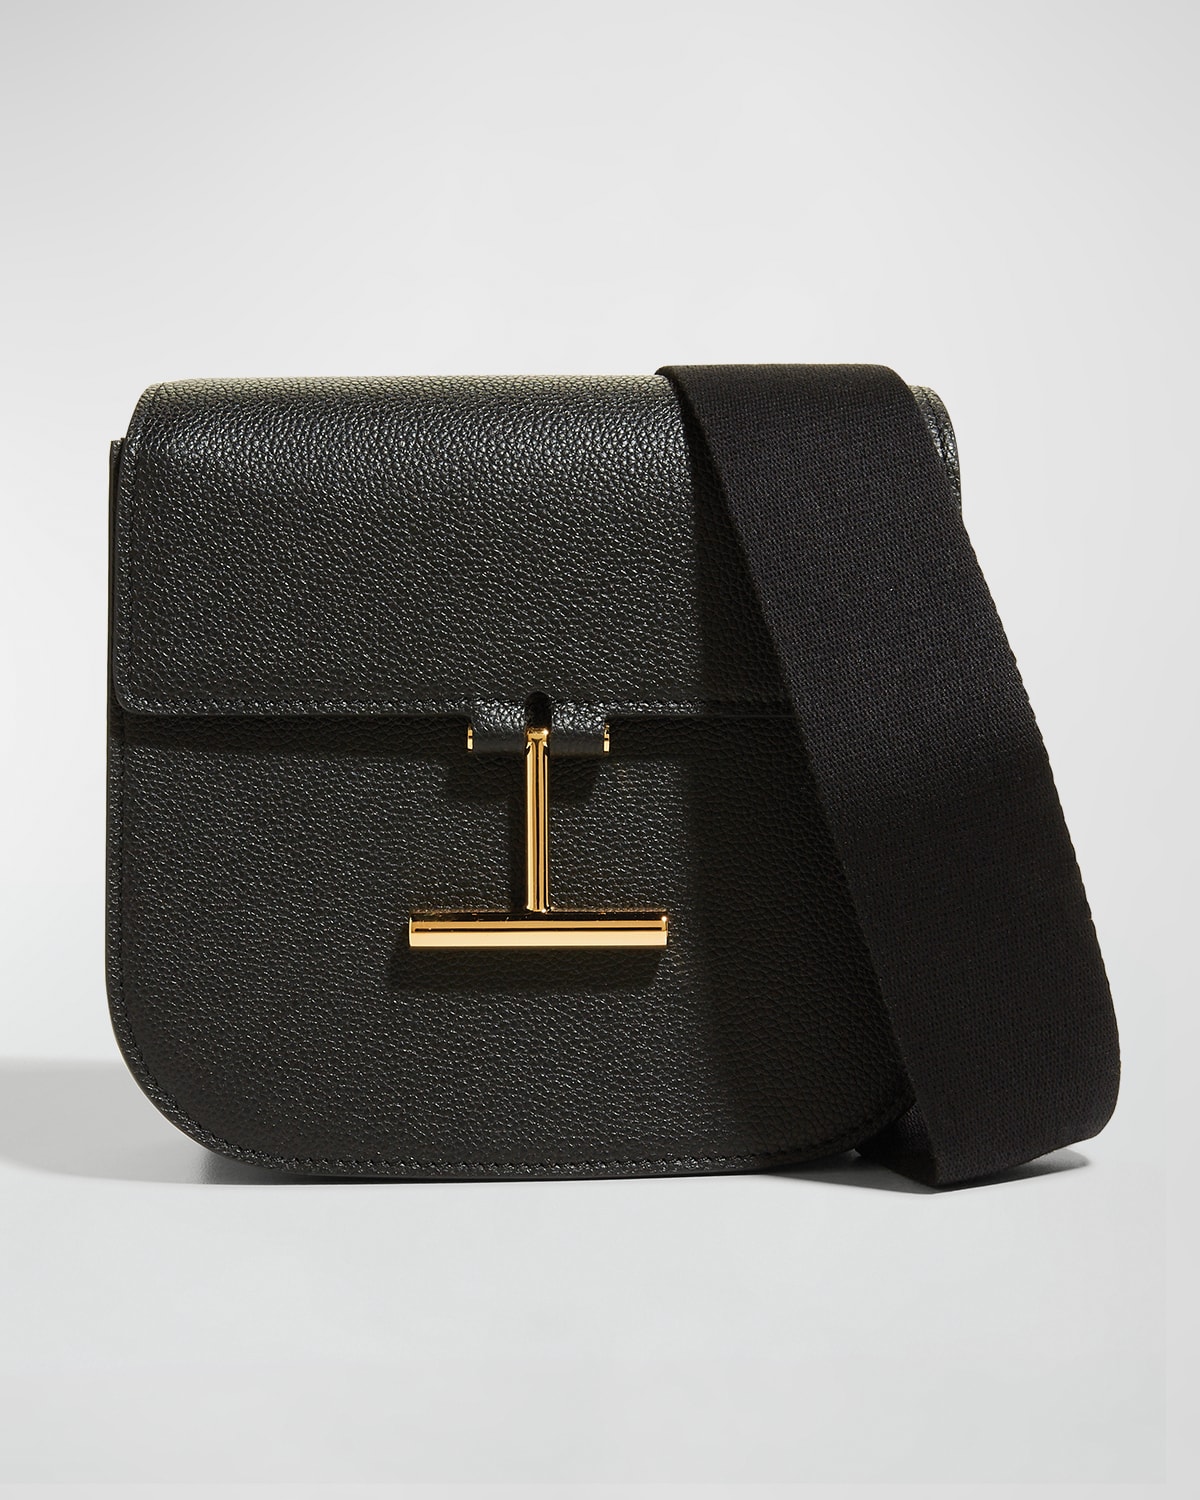 Tara Mini Crossbosy in Grained Leather with Webbed Strap